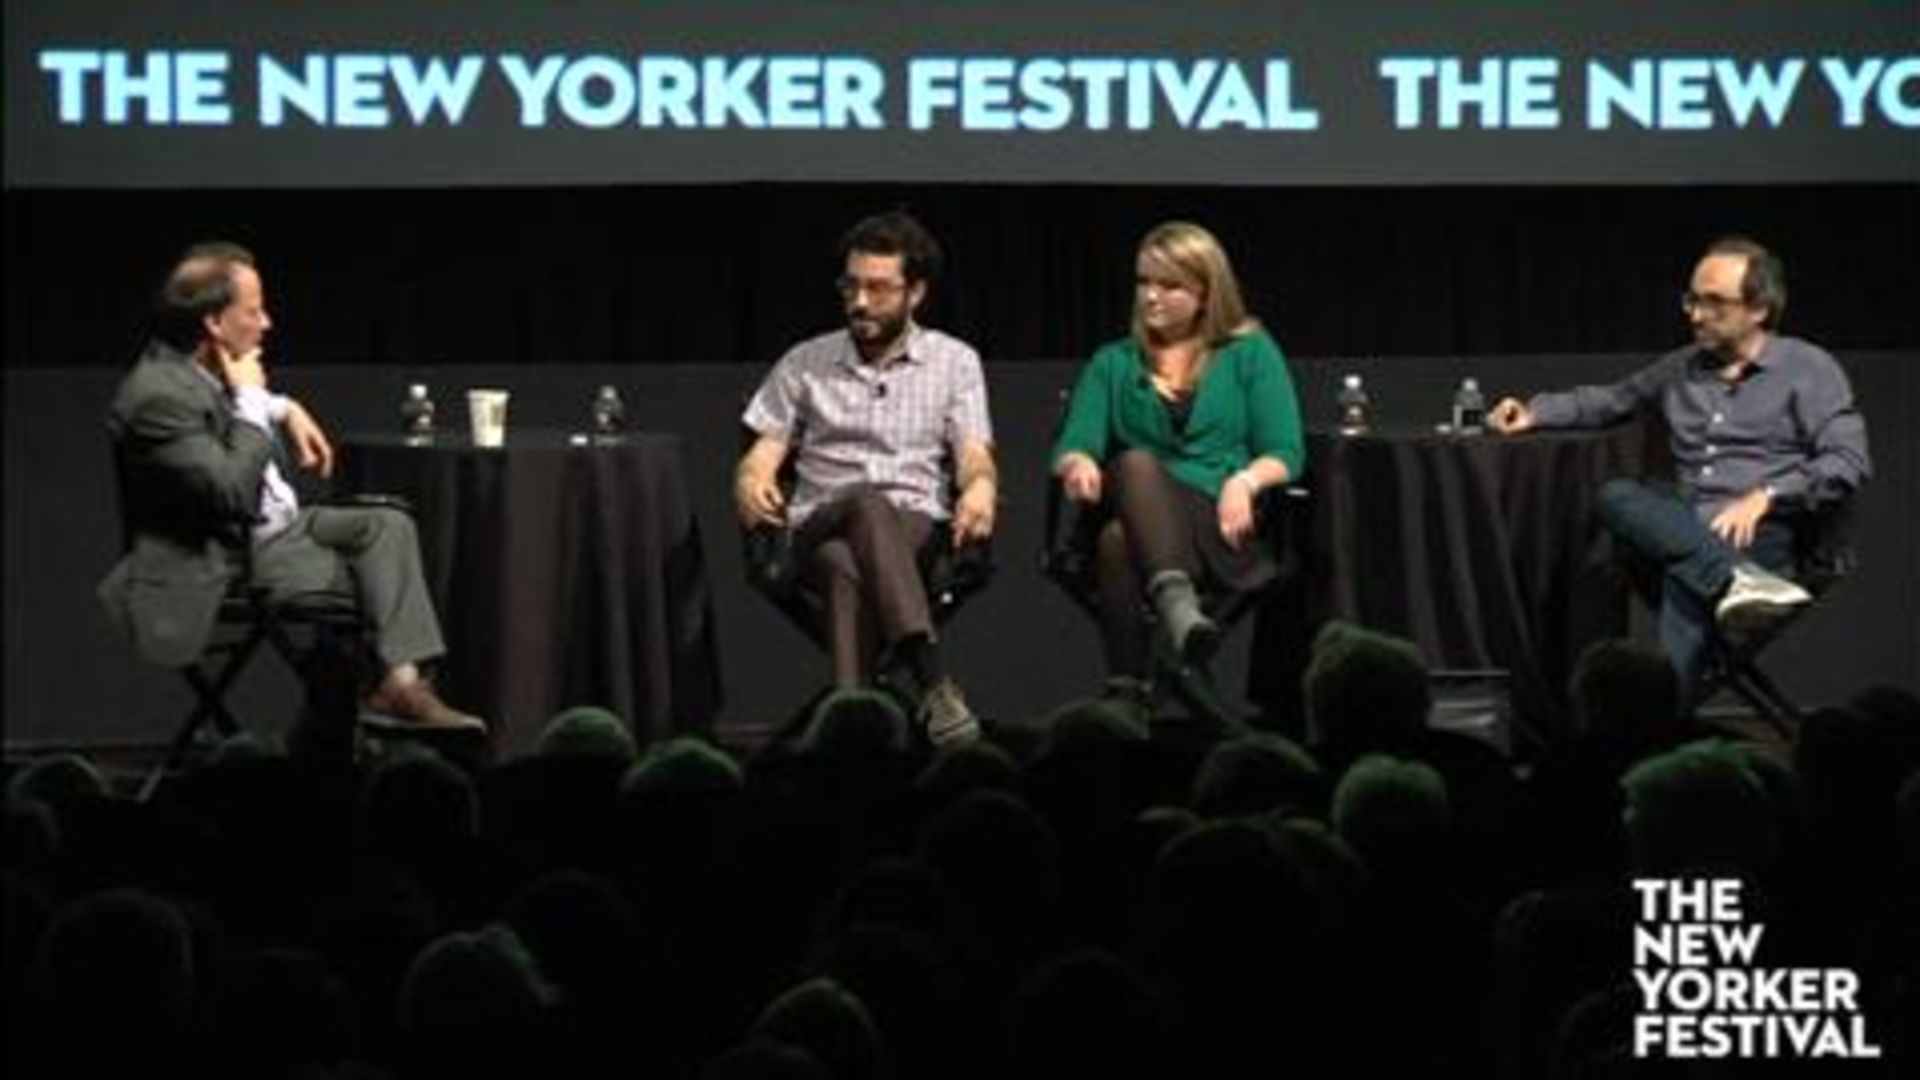 Watch The Death of the Novel New Yorker Festival The New Yorker pic picture